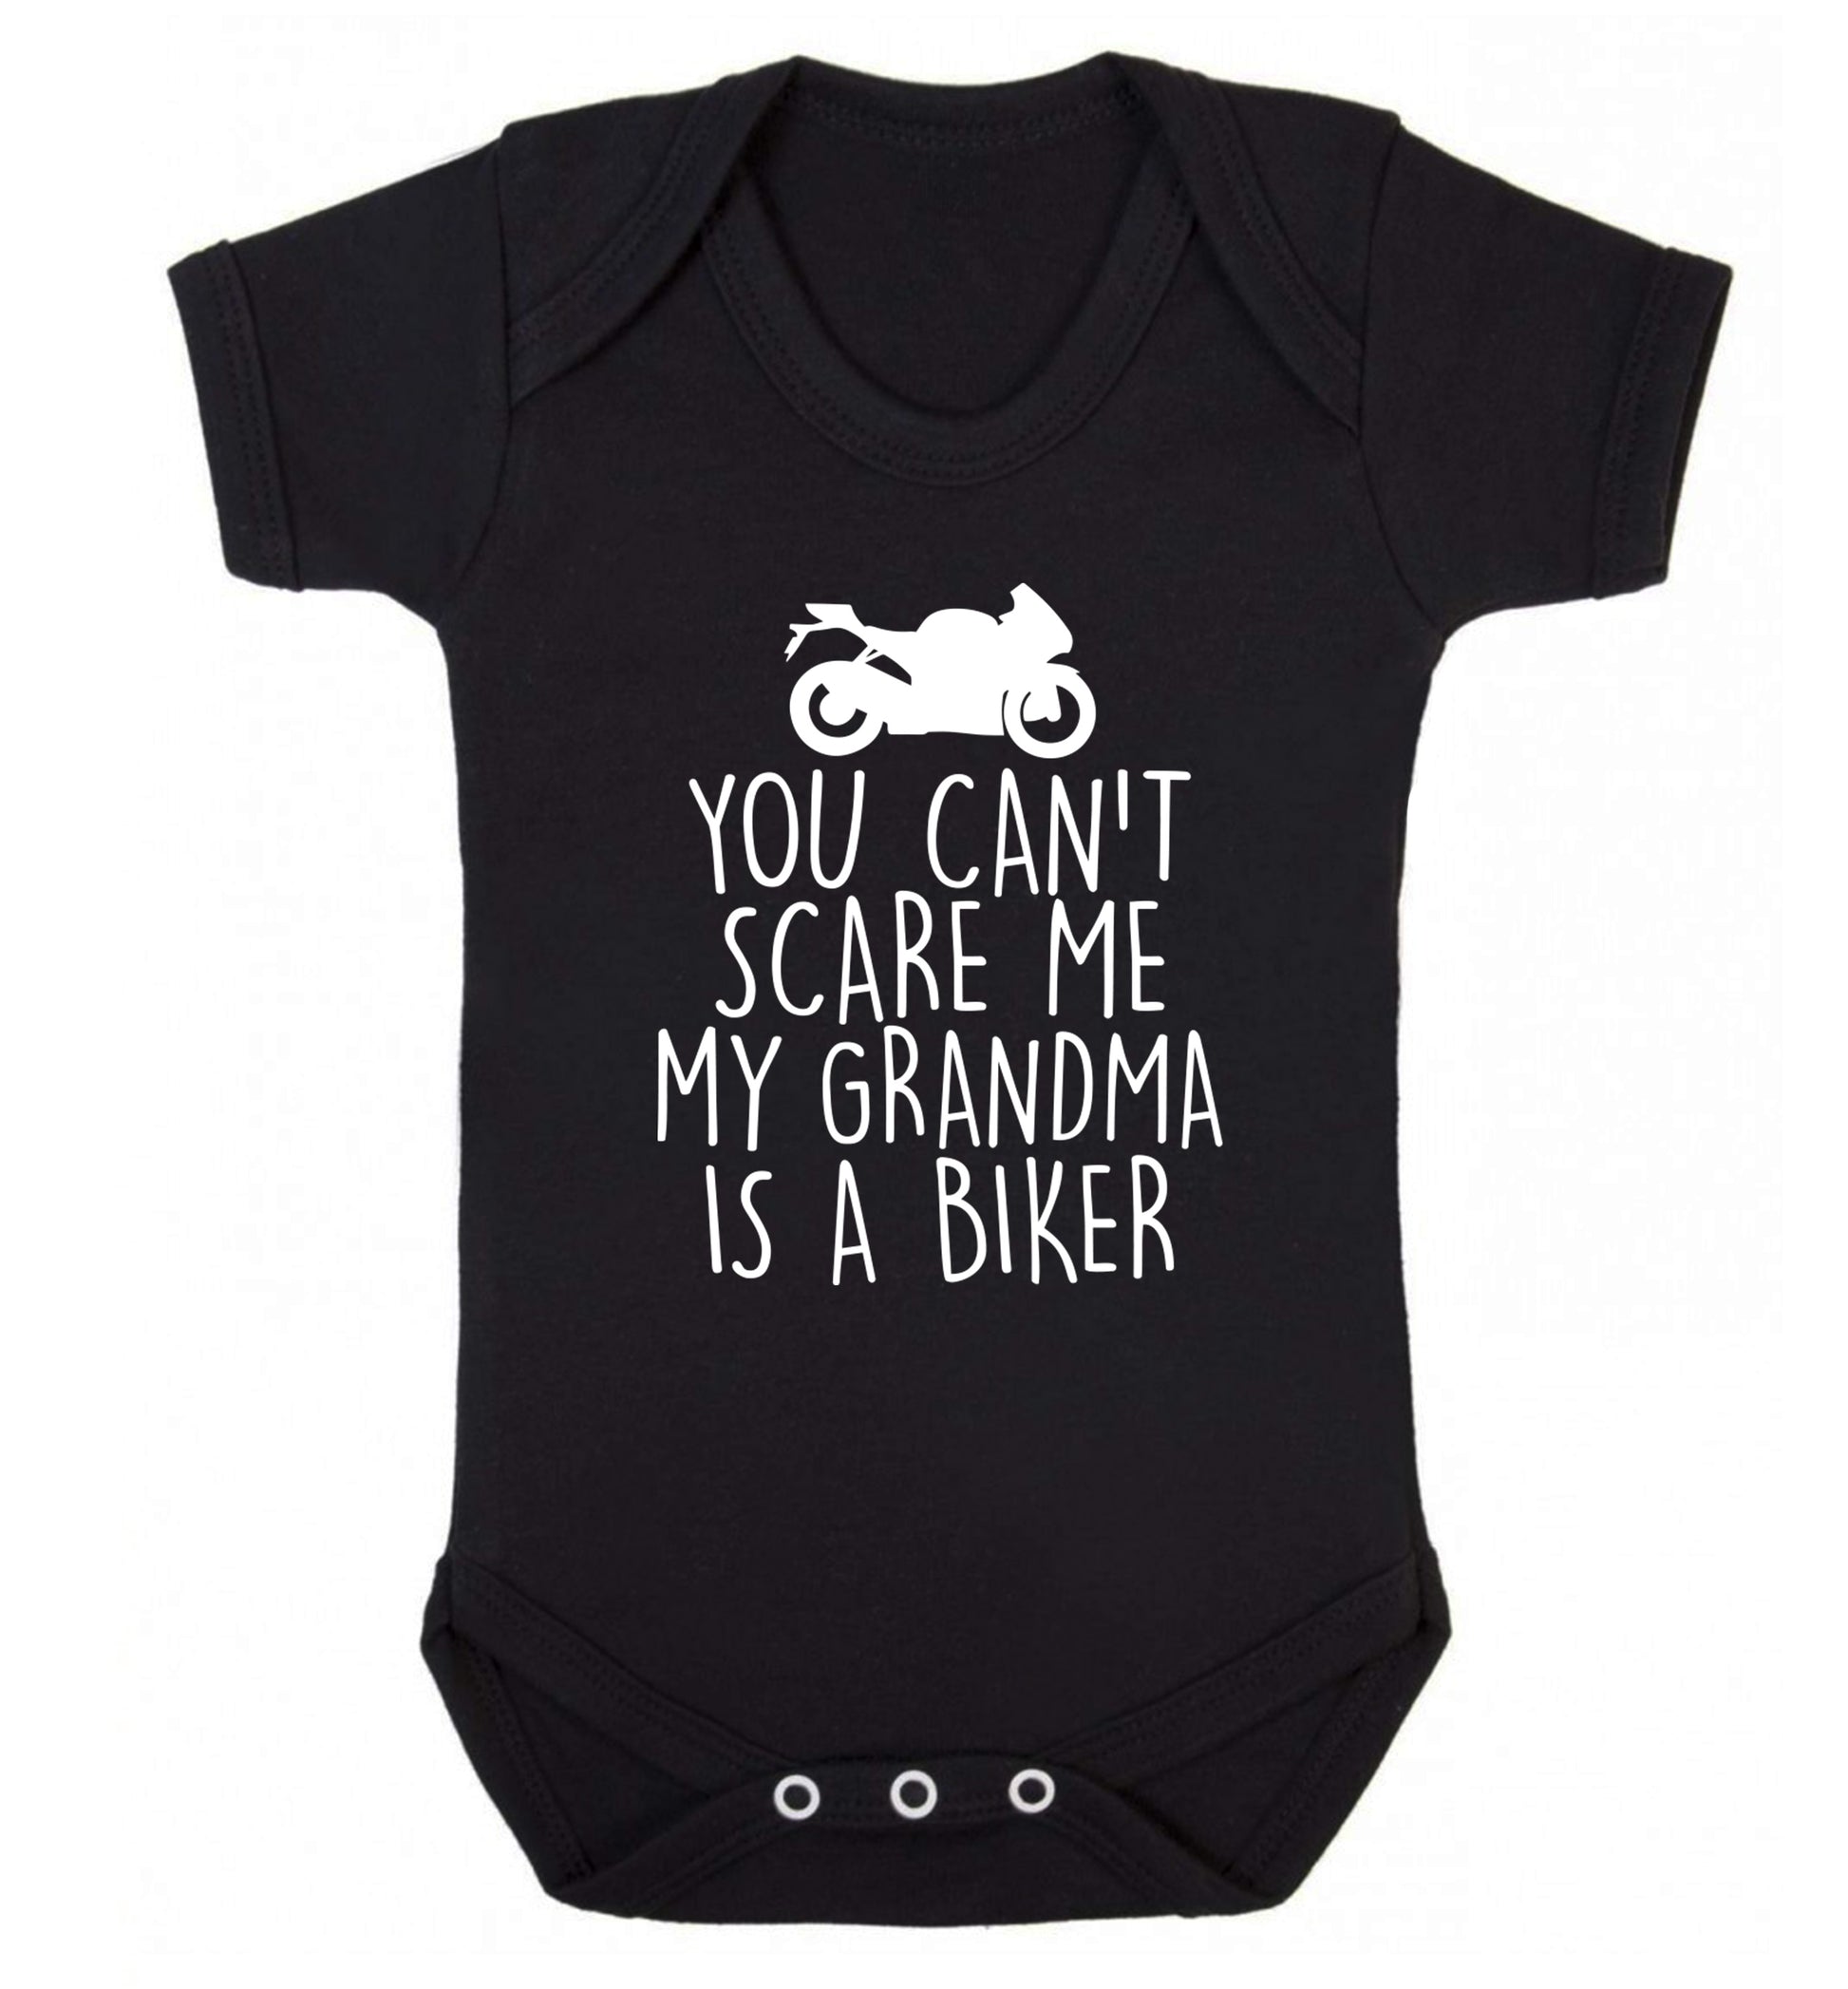 You can't scare me my grandma is a biker Baby Vest black 18-24 months